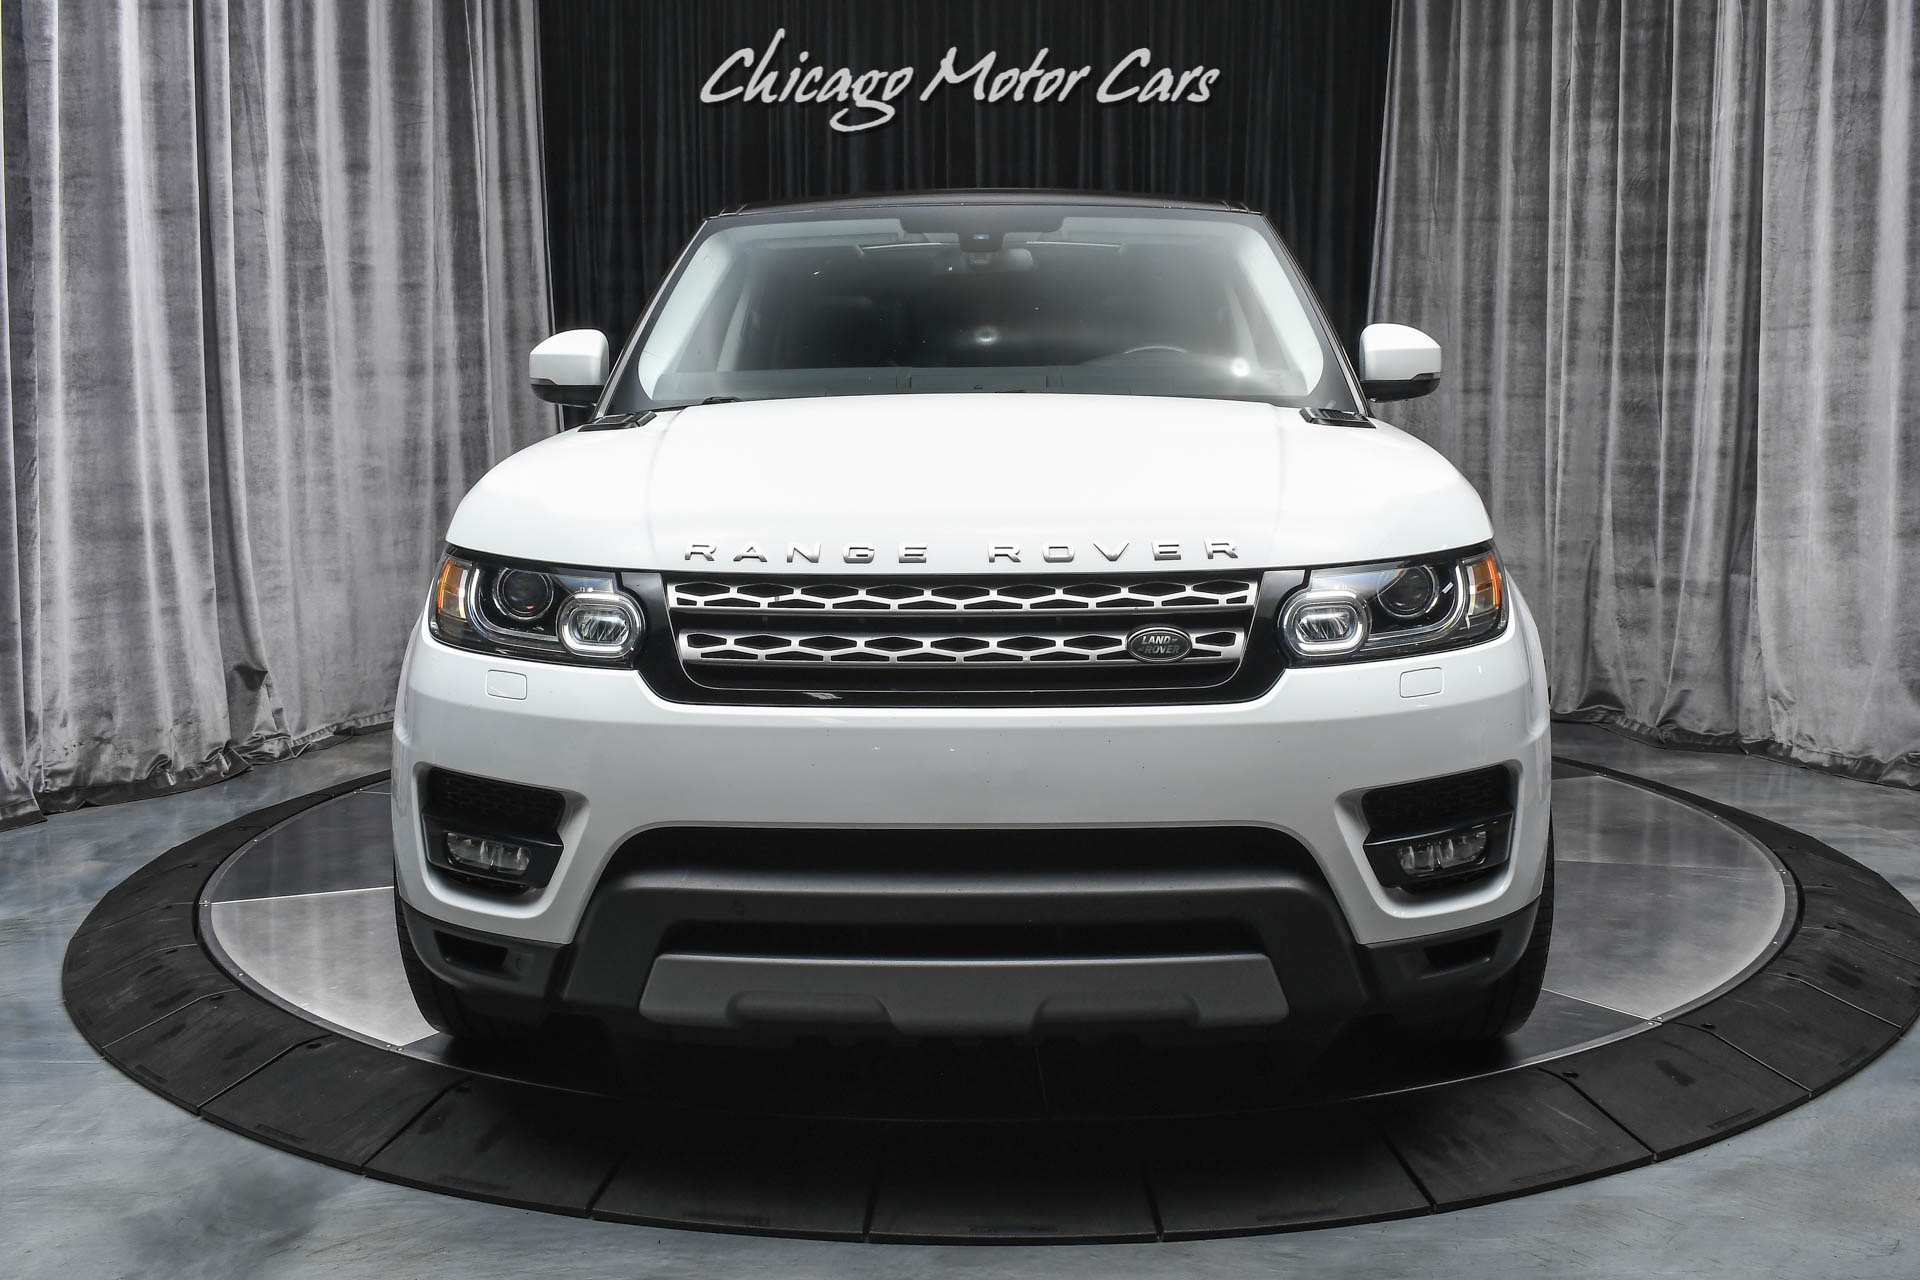 Used-2015-Land-Rover-Range-Rover-Sport-SE-69kMSRP-Panoramic-Roof-Climate-Comfort-and-Visibility-Pack